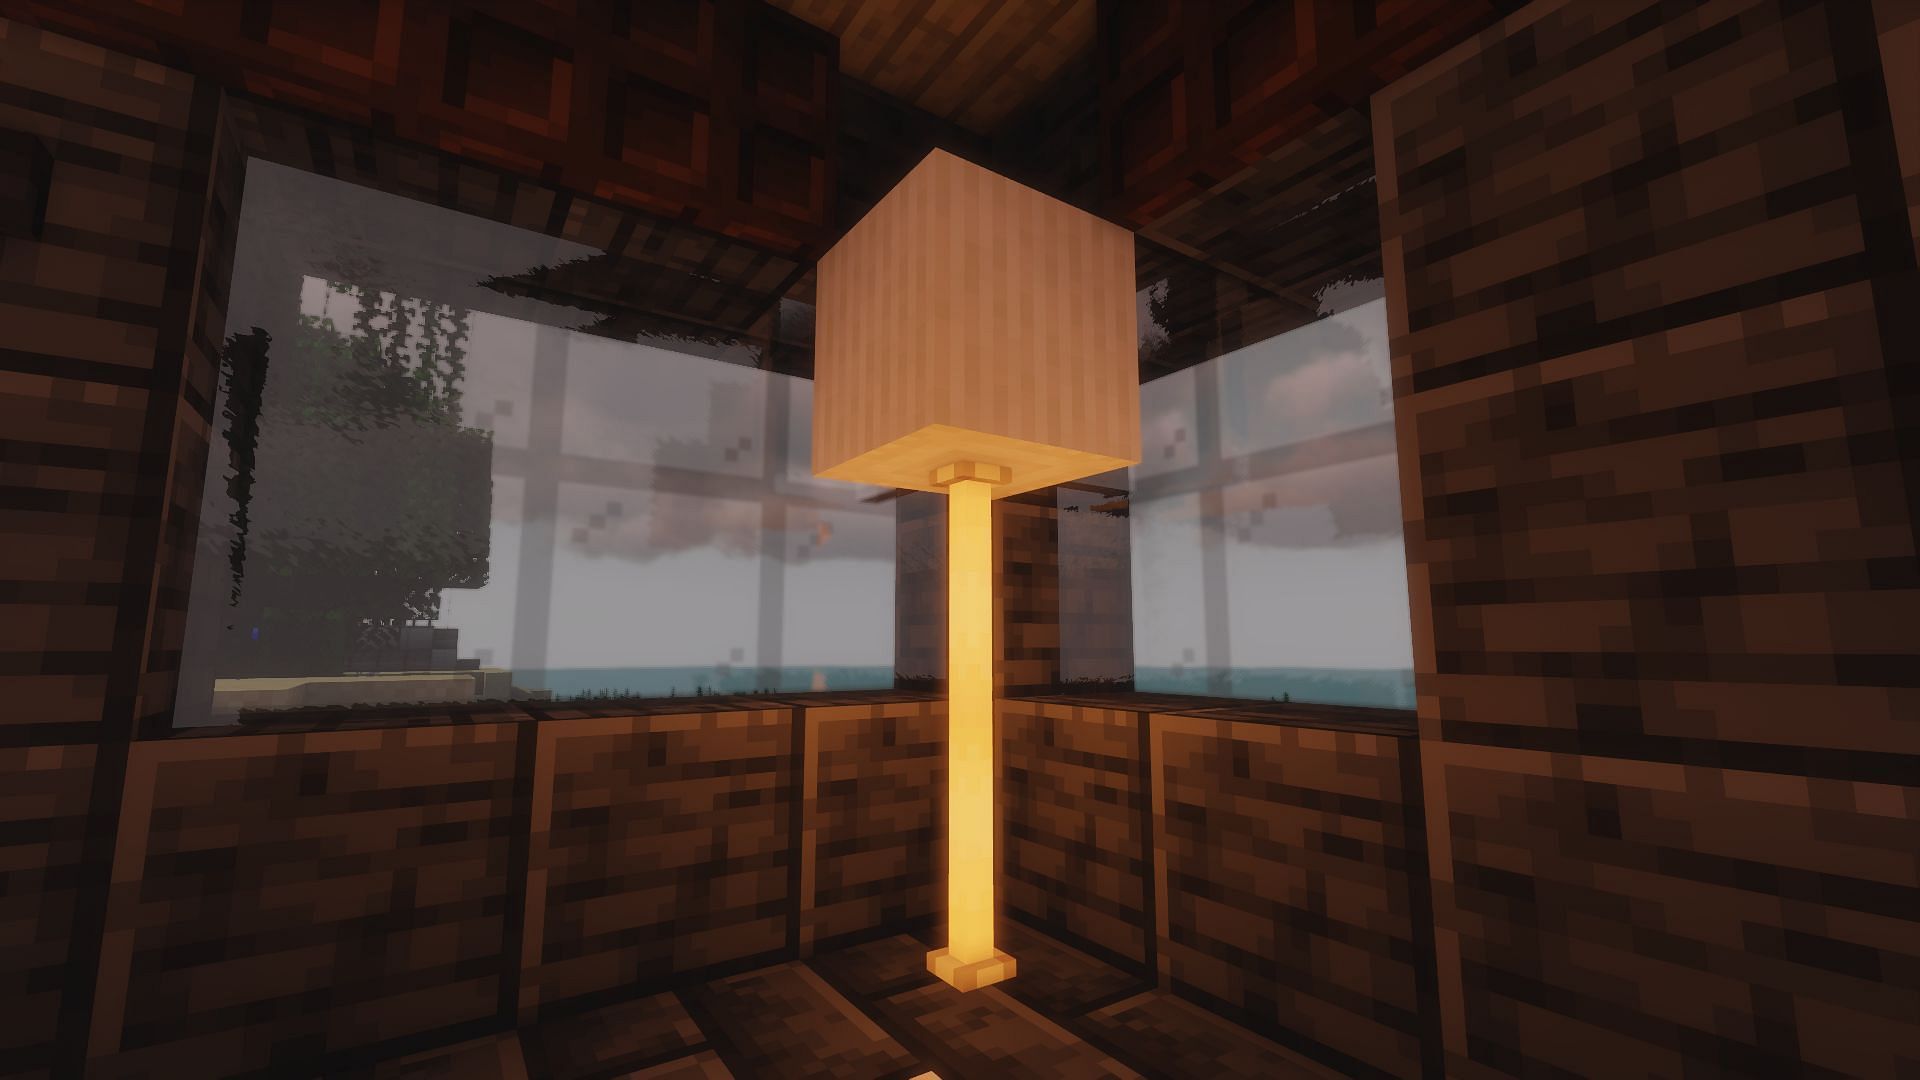 An example of a modern lamp (Image via Minecraft)